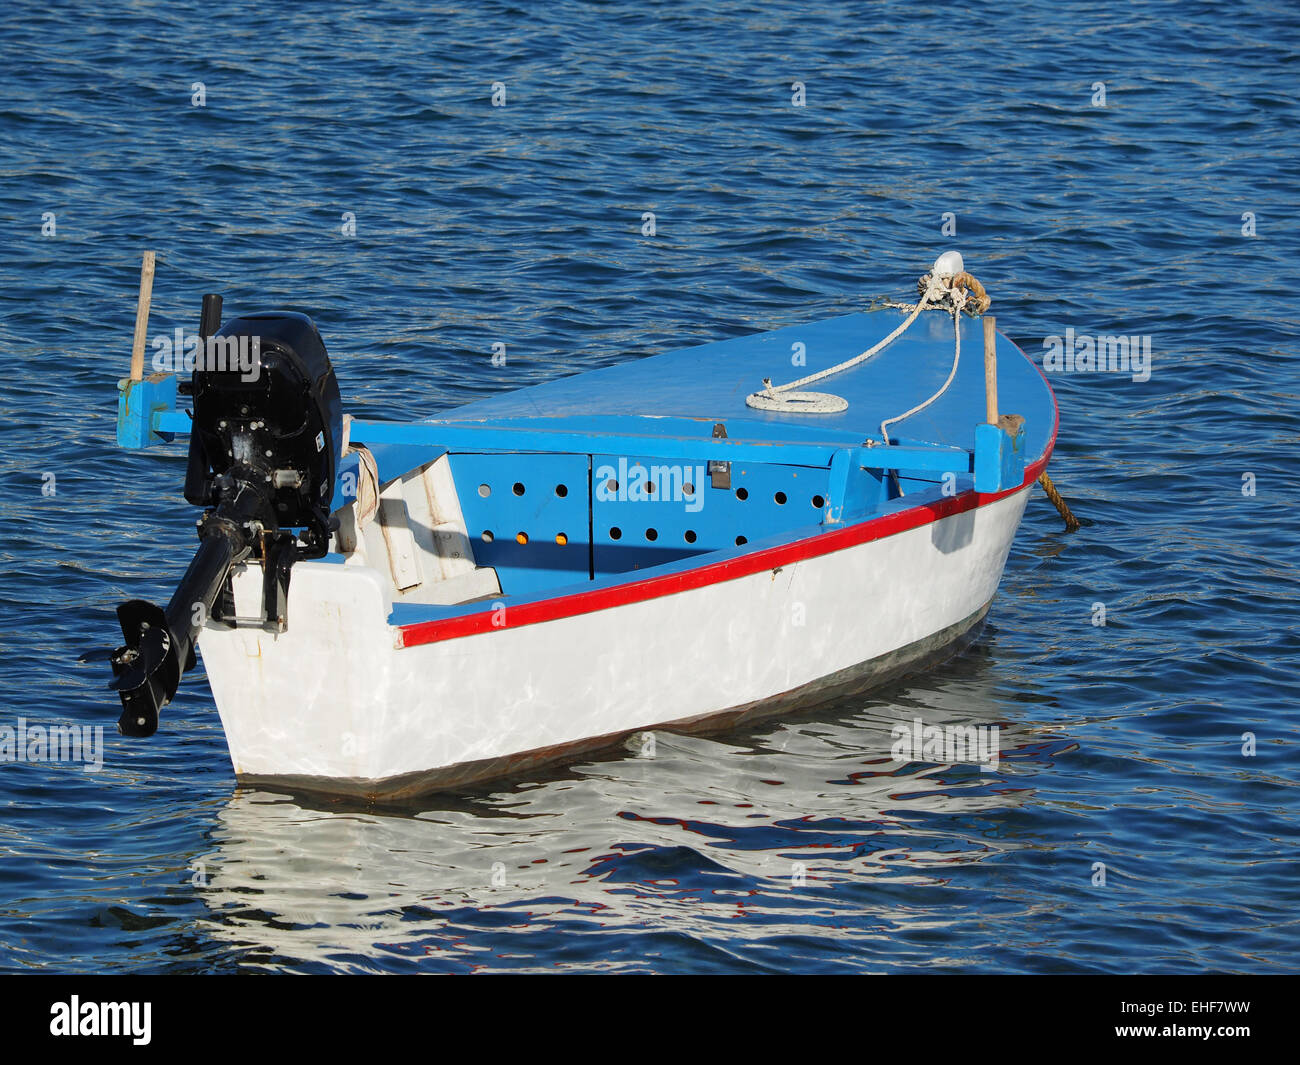 small wooden barge boat with outboard engine floats through blue lagoon waves Stock Photo